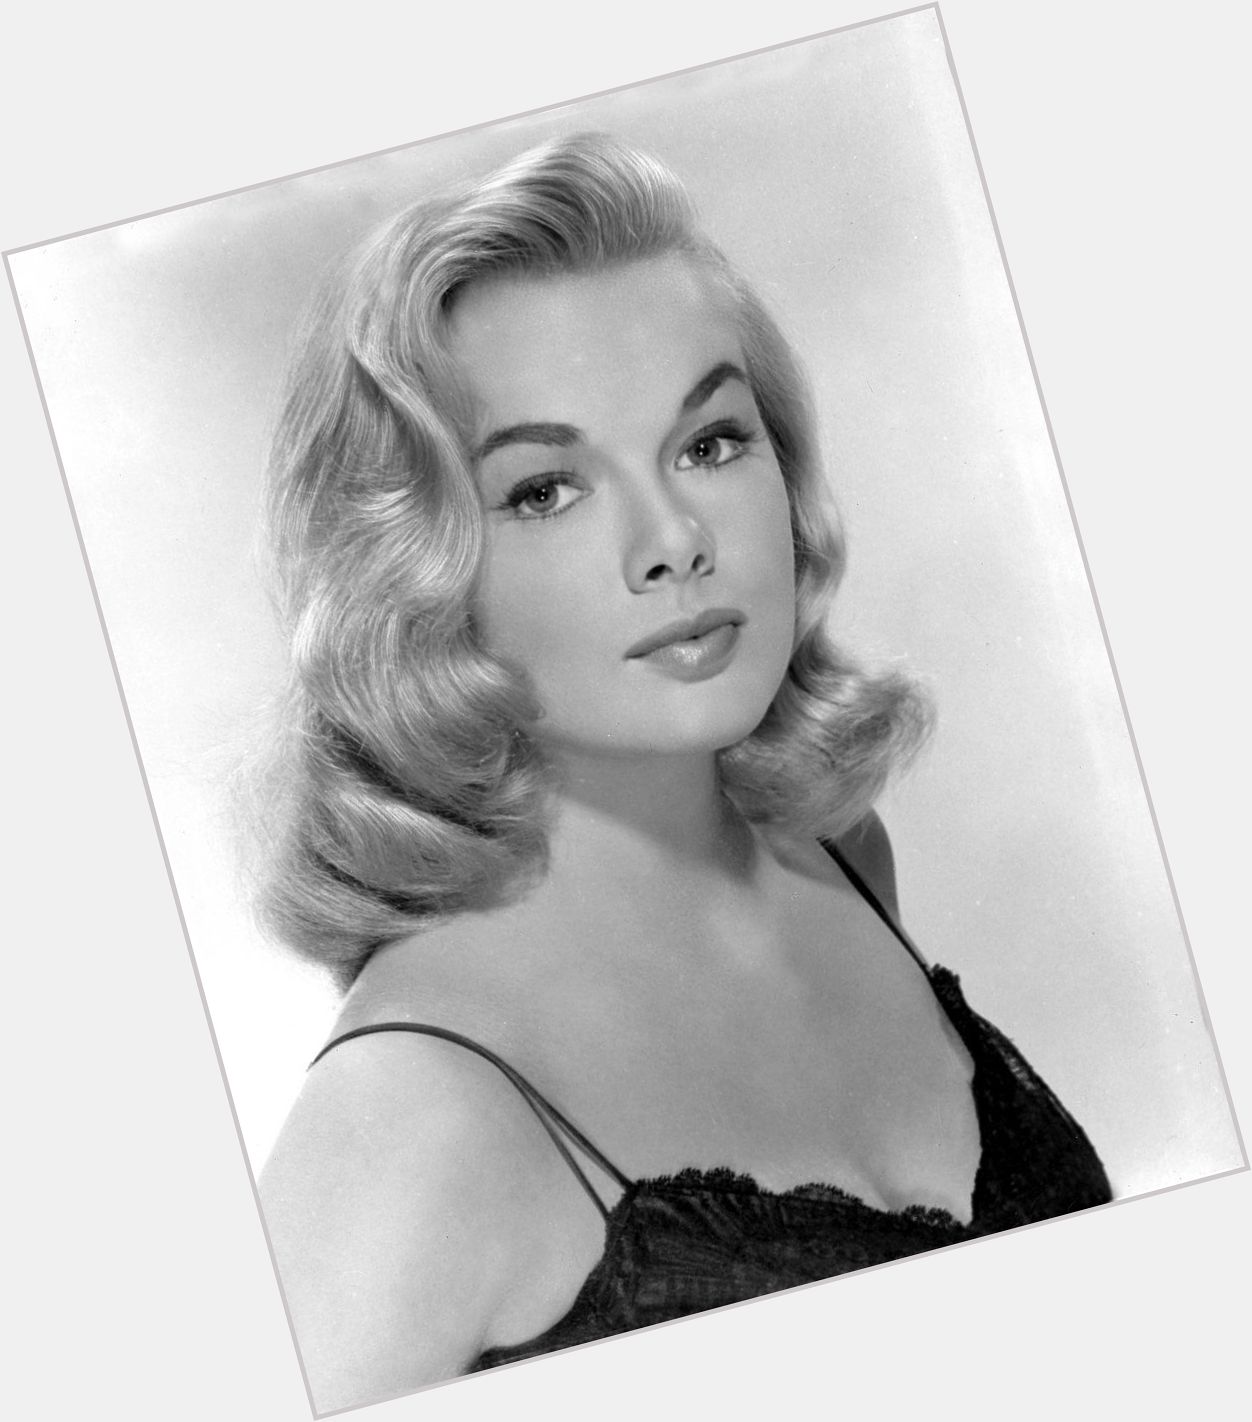 Happy Birthday to Leslie Parrish! She turned 84 on Mar 18. 